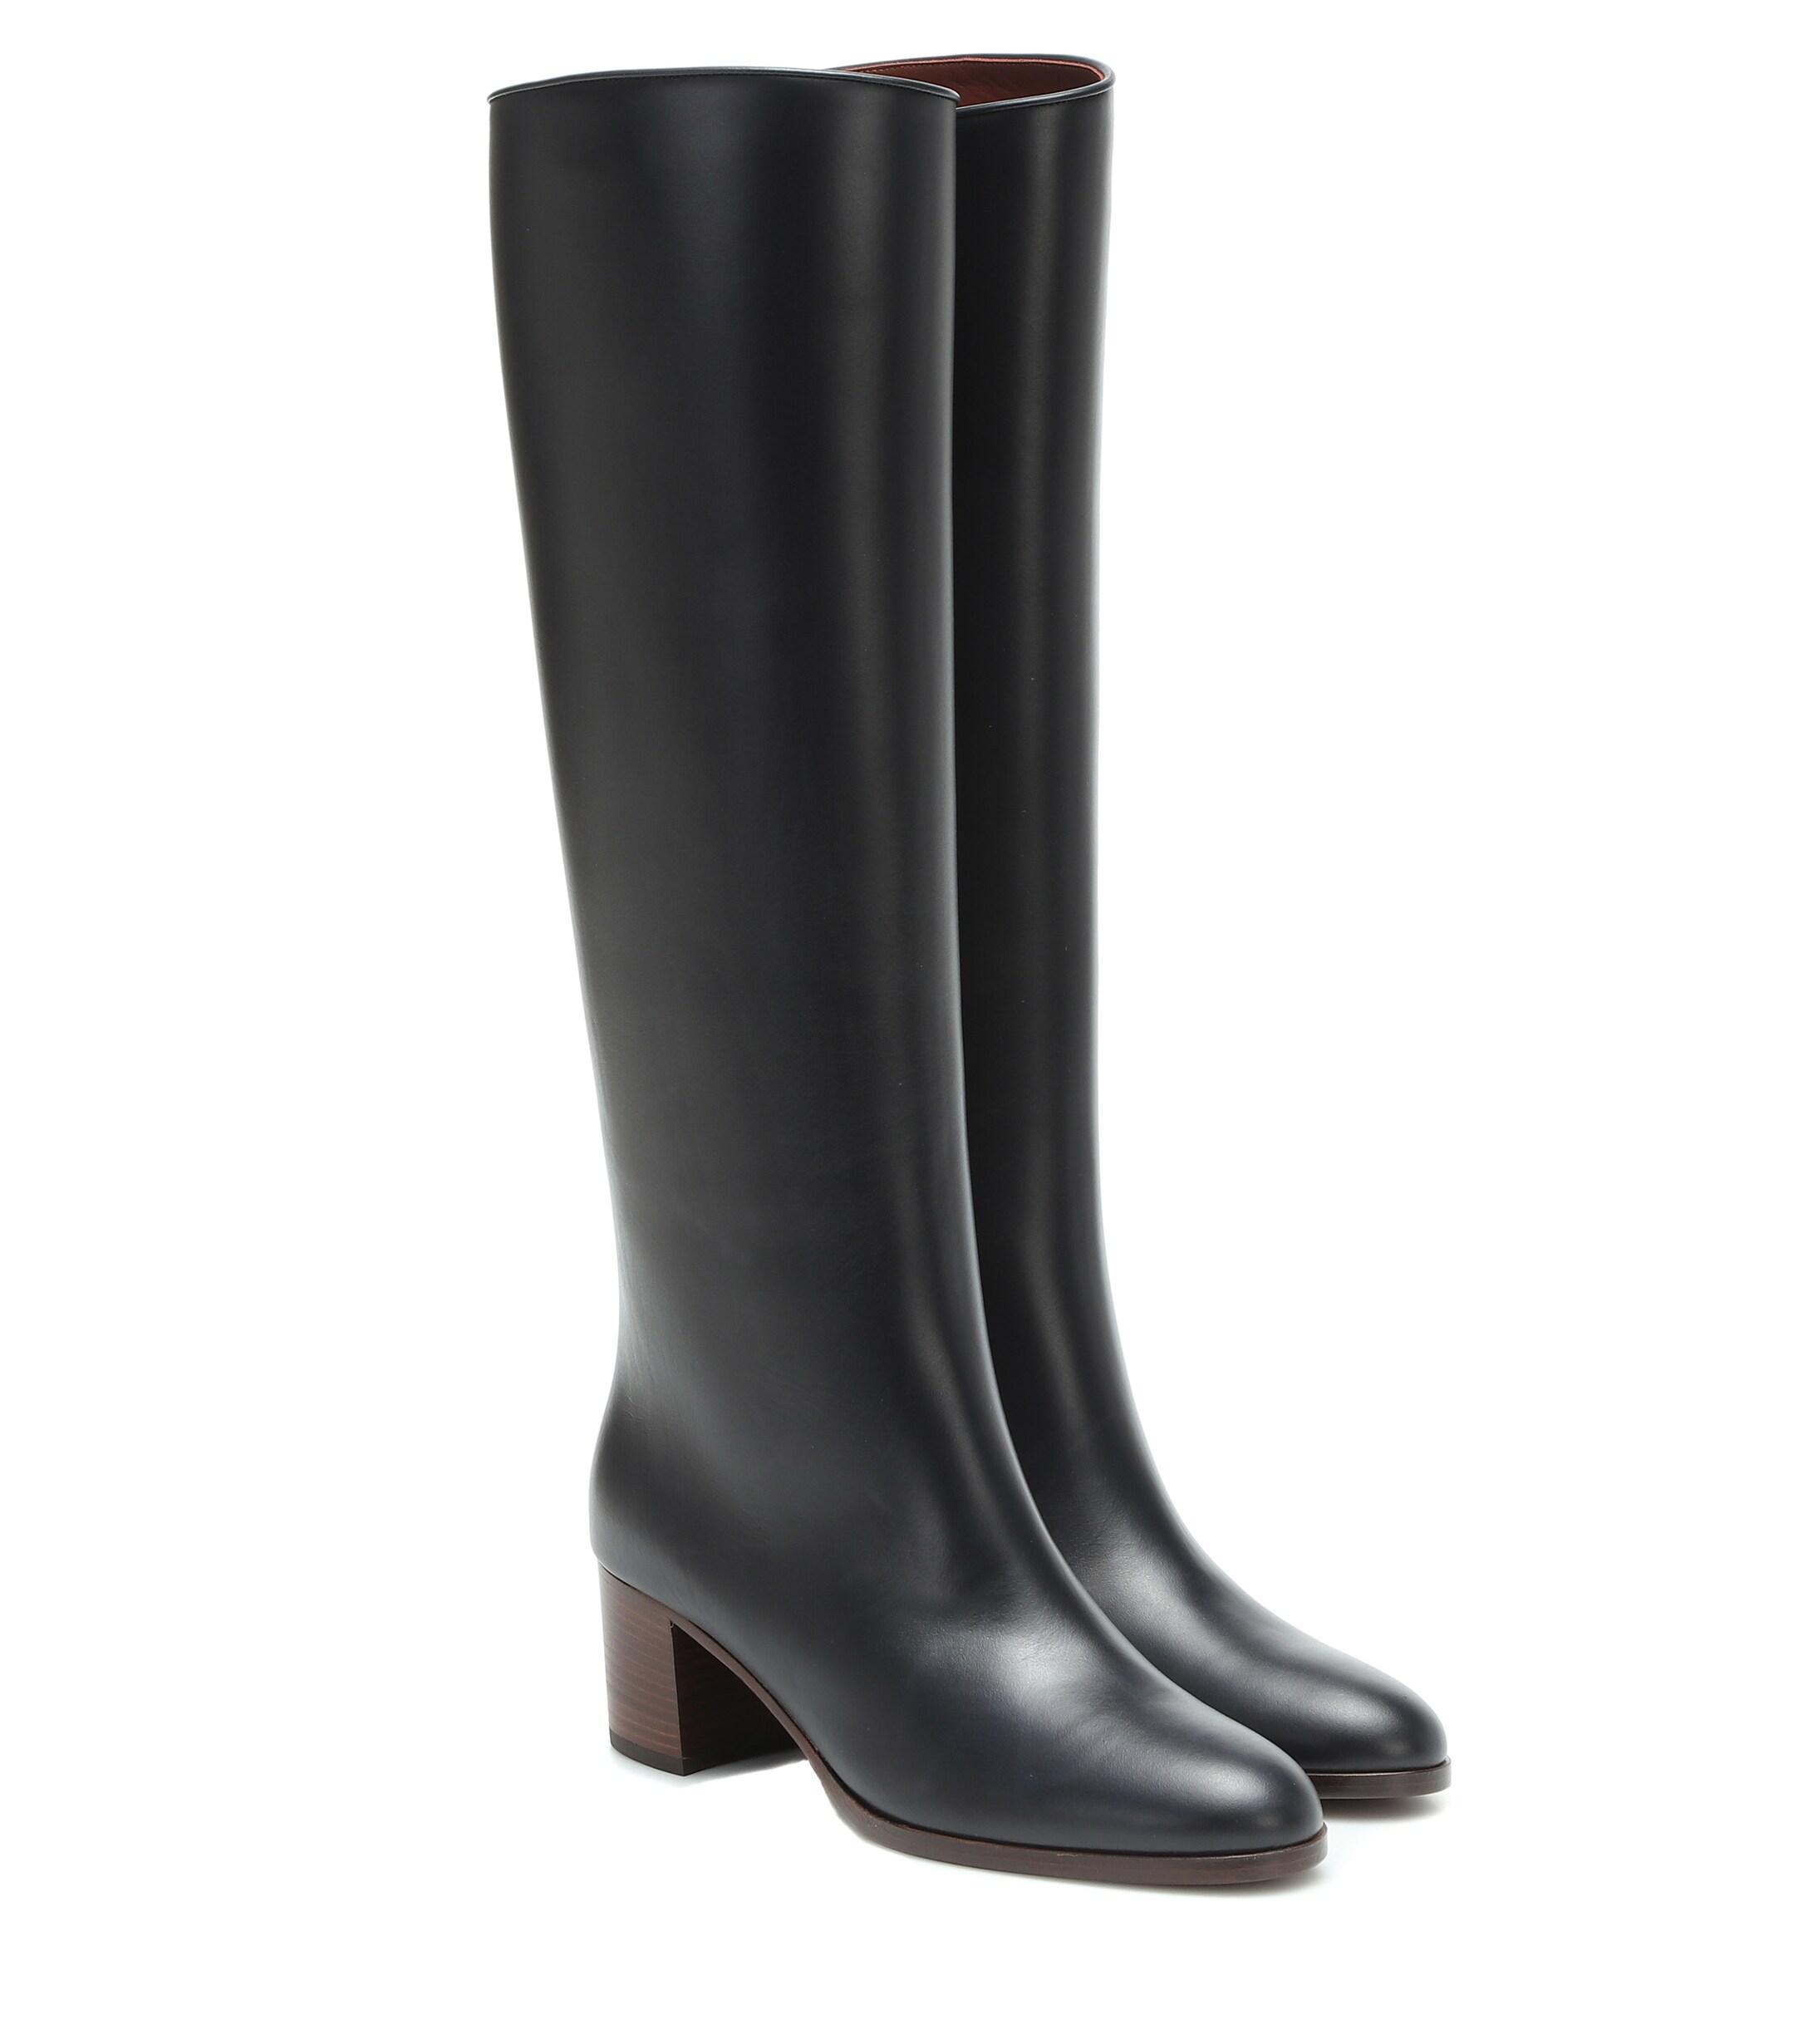 Loro Piana Paris 55 Leather Knee-high Boots in Black - Lyst